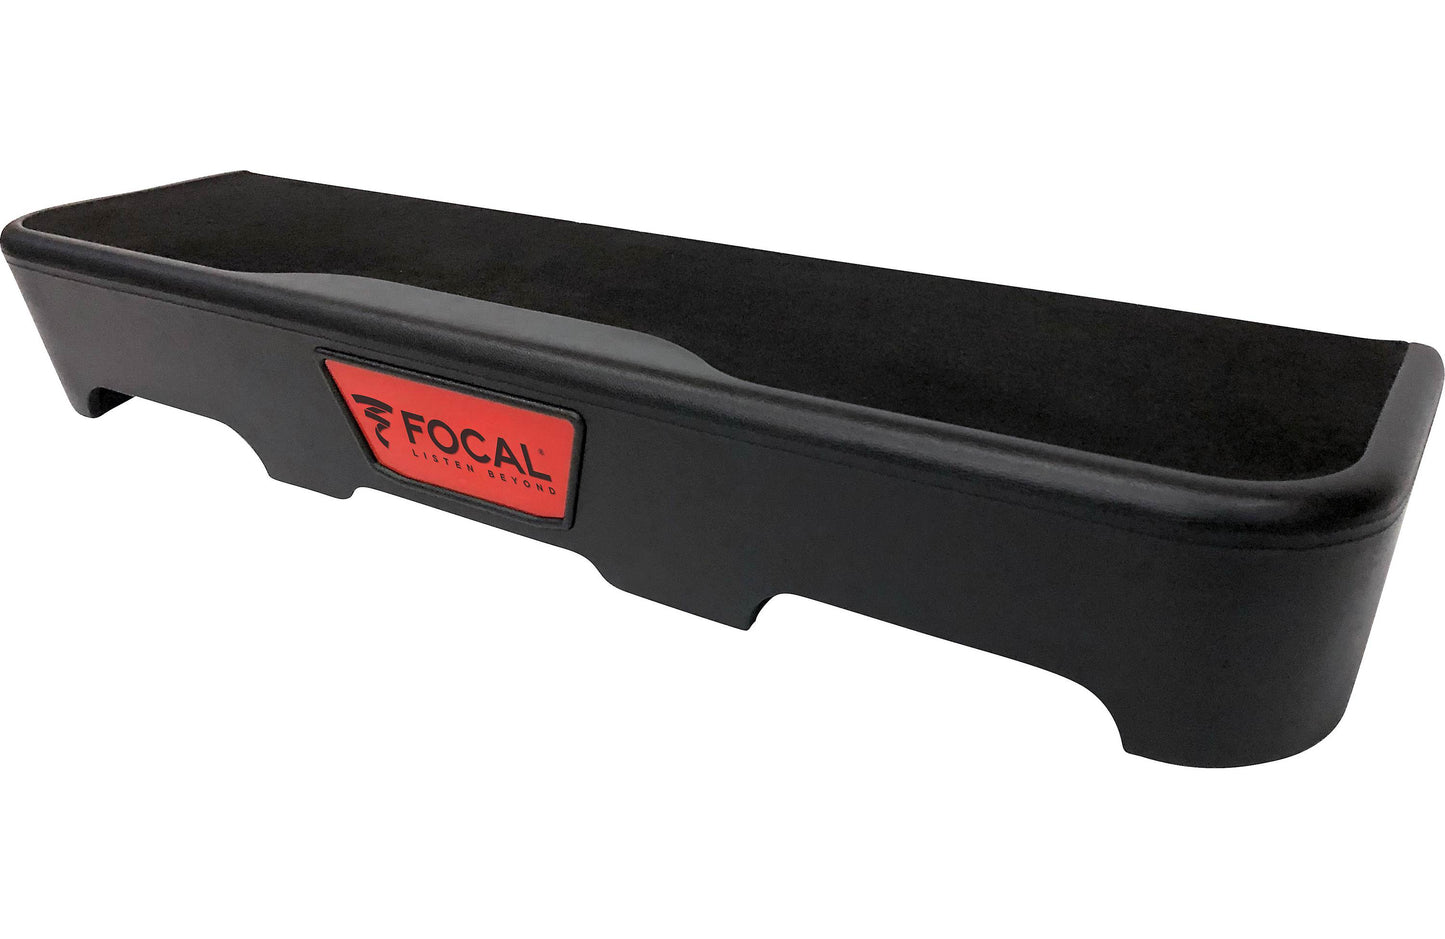 Focal Flax Chevy Dual 1500 Expert Series subwoofer enclosure — fits 2019-up Chevrolet 1500 and 2020-up Chevrolet 2500/3500 Crew Cab trucks